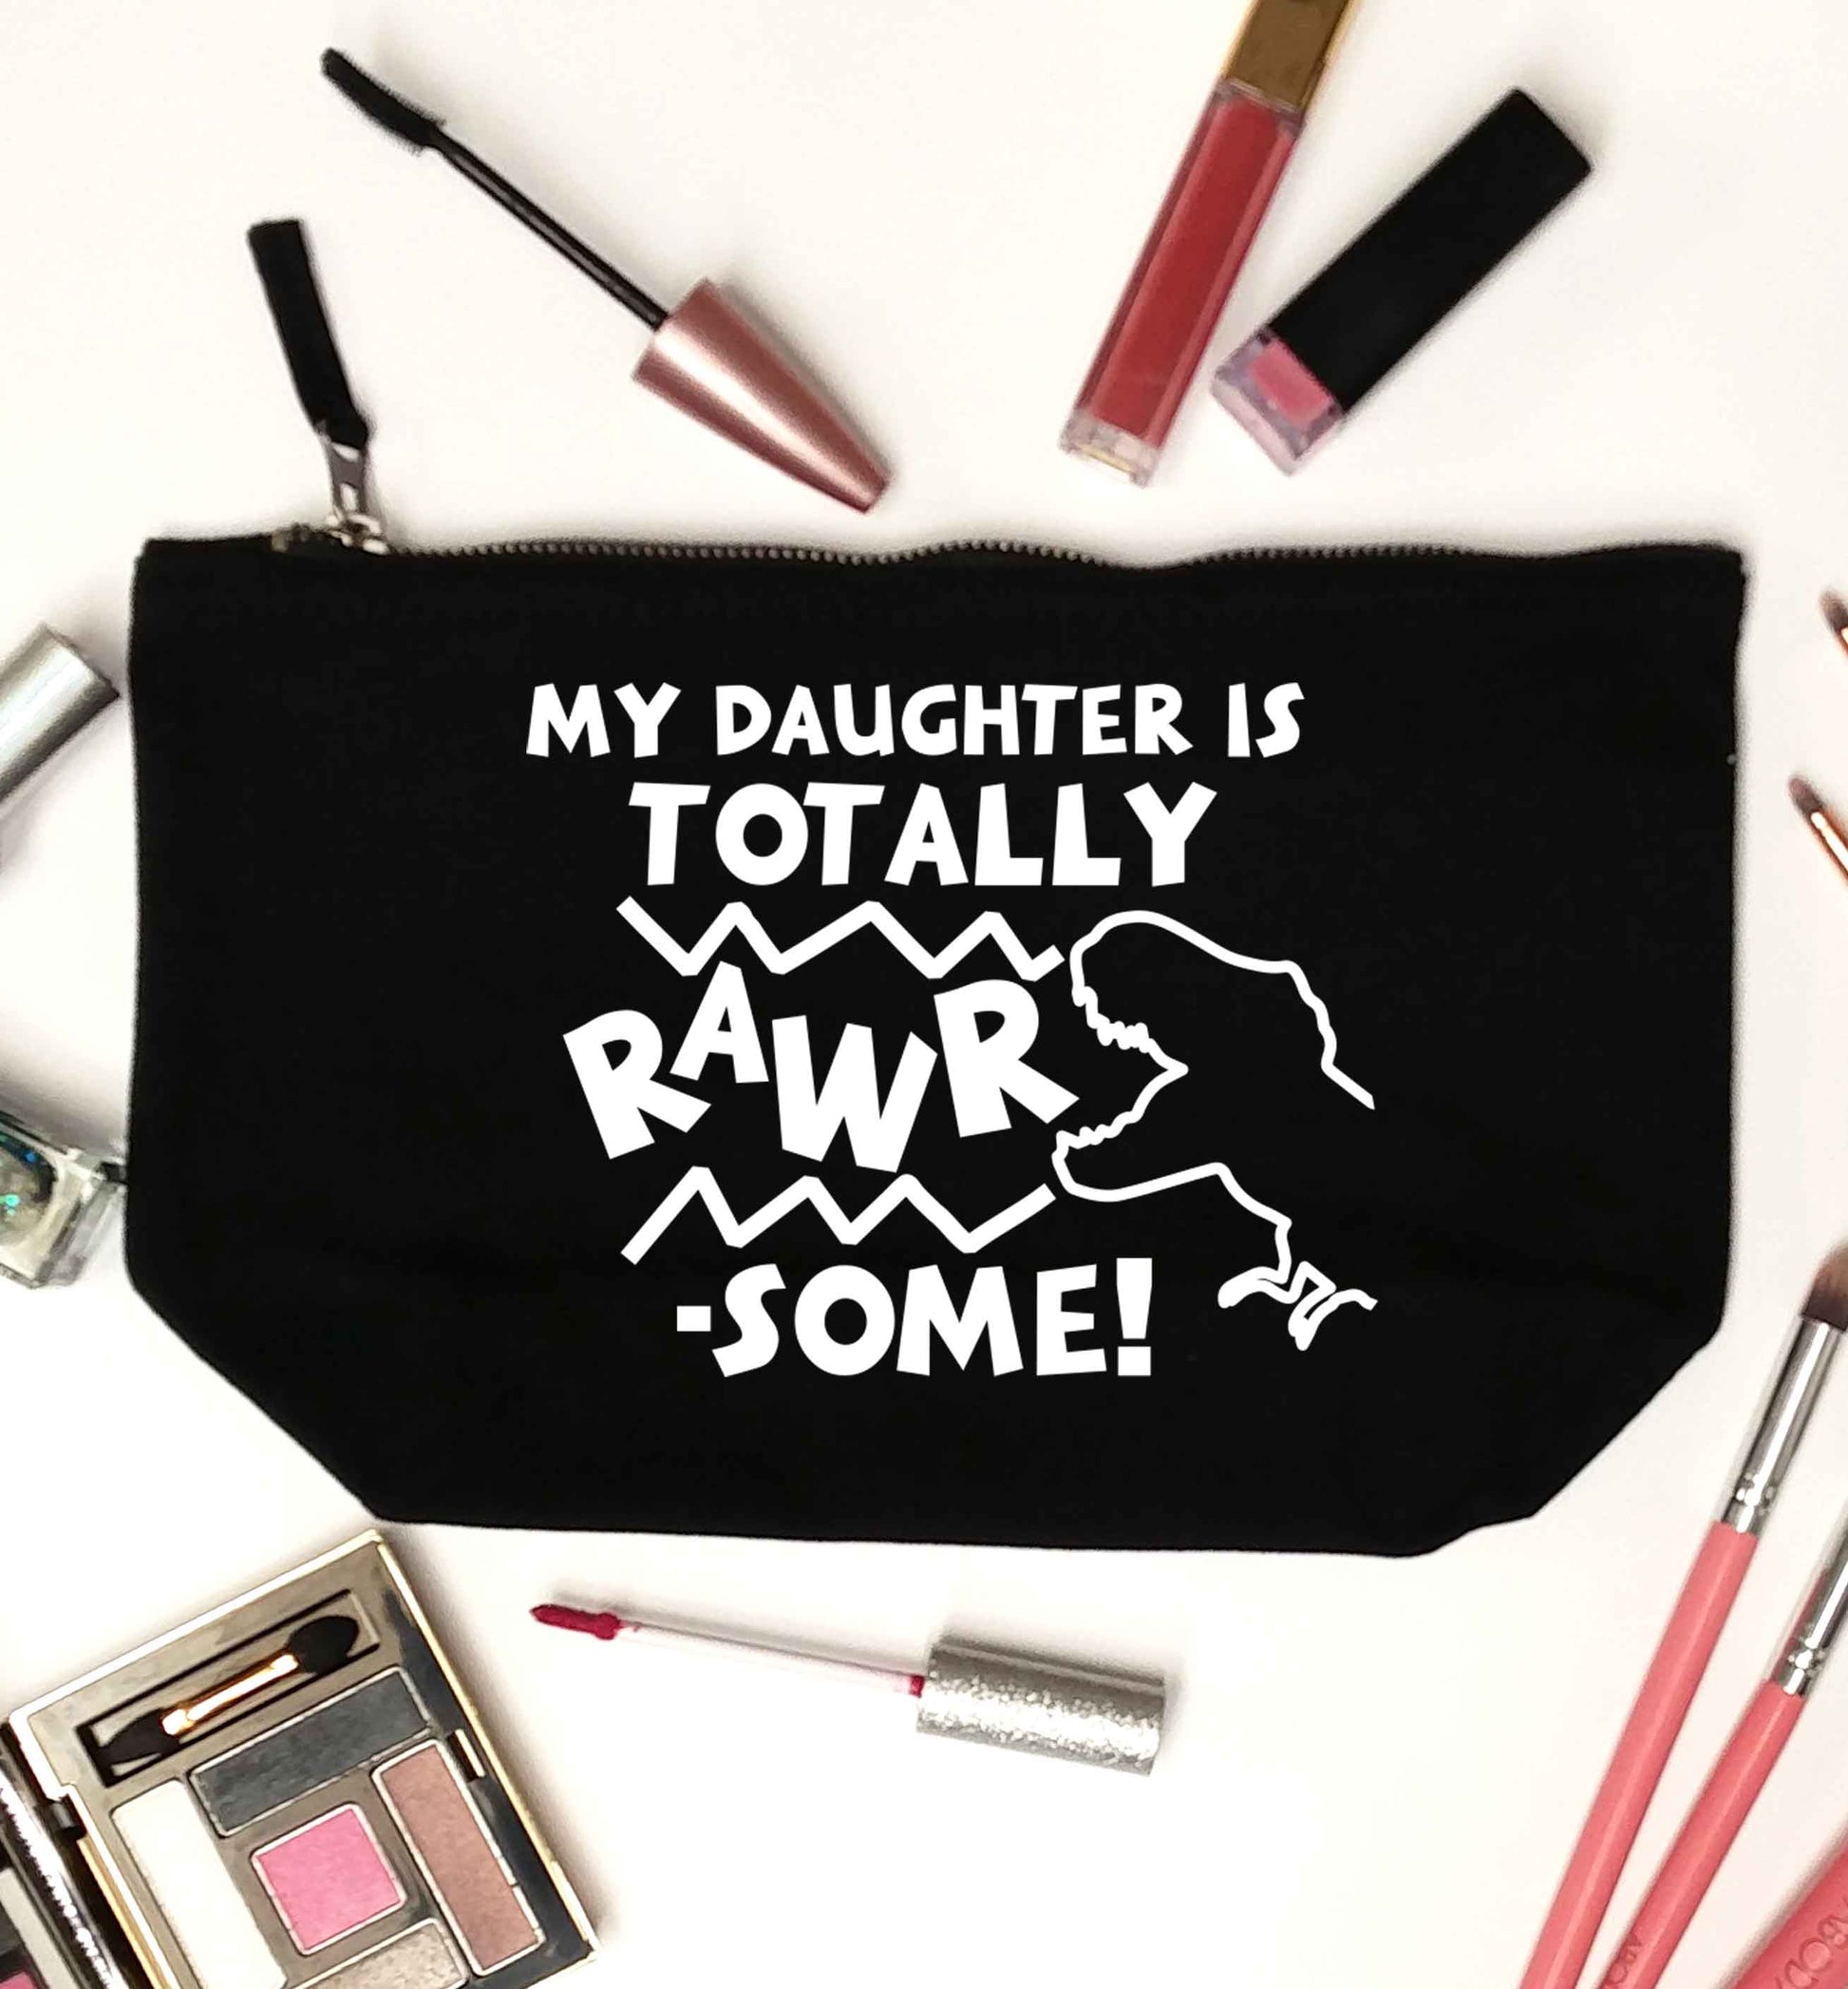 My daughter is totally rawrsome black makeup bag